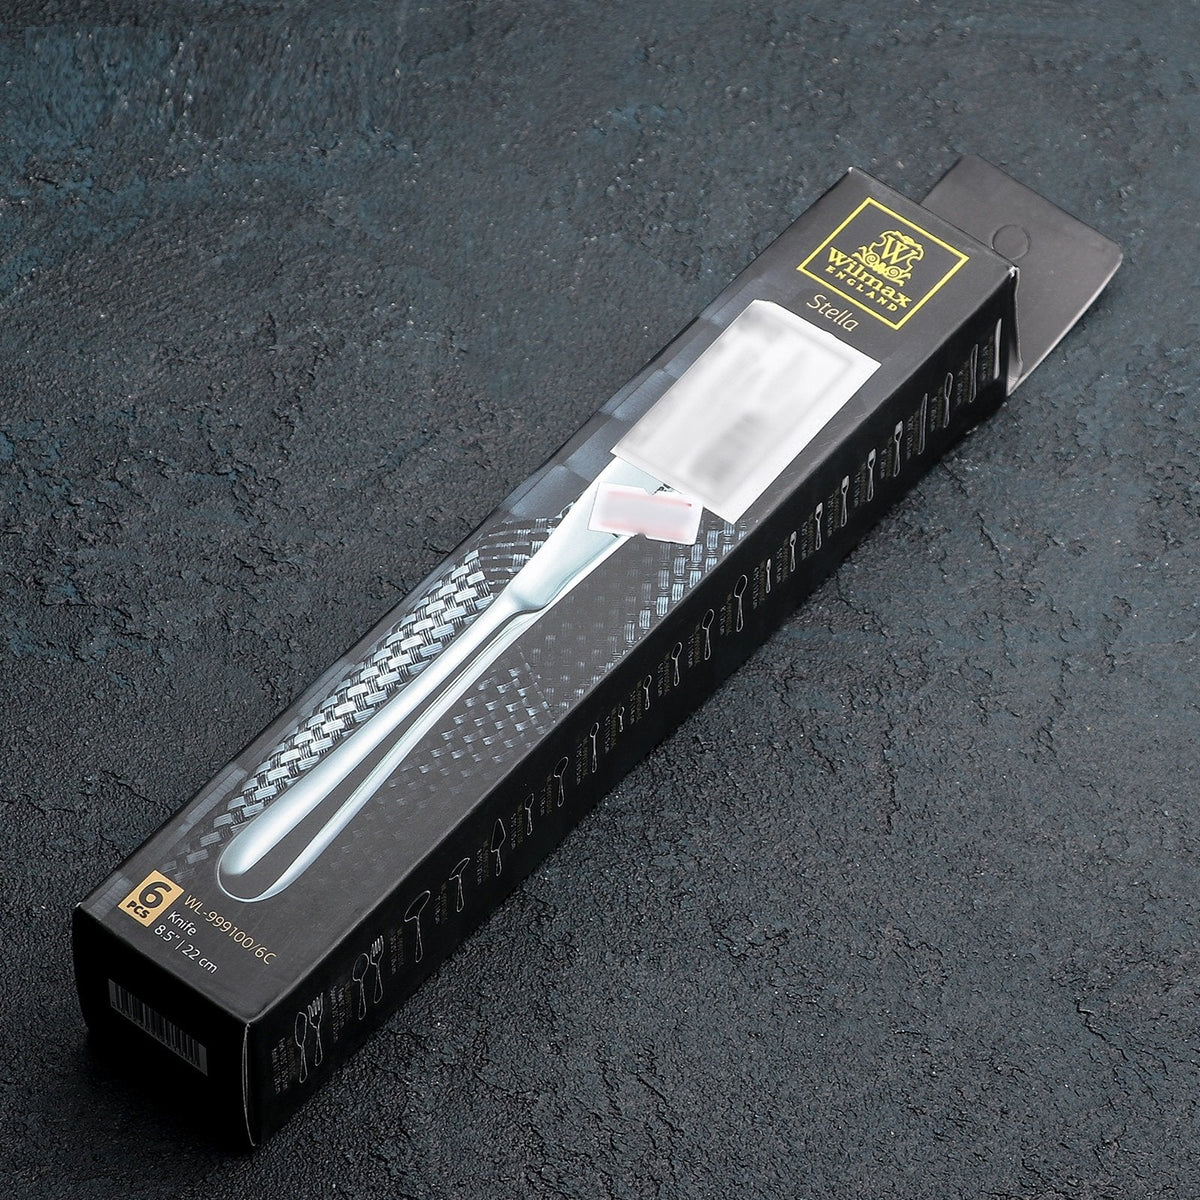 Wilmax High Polish Stainless Steel Dinner Knife 8.5" | 22 Cm White Box Packing SKU: WL-999100/A